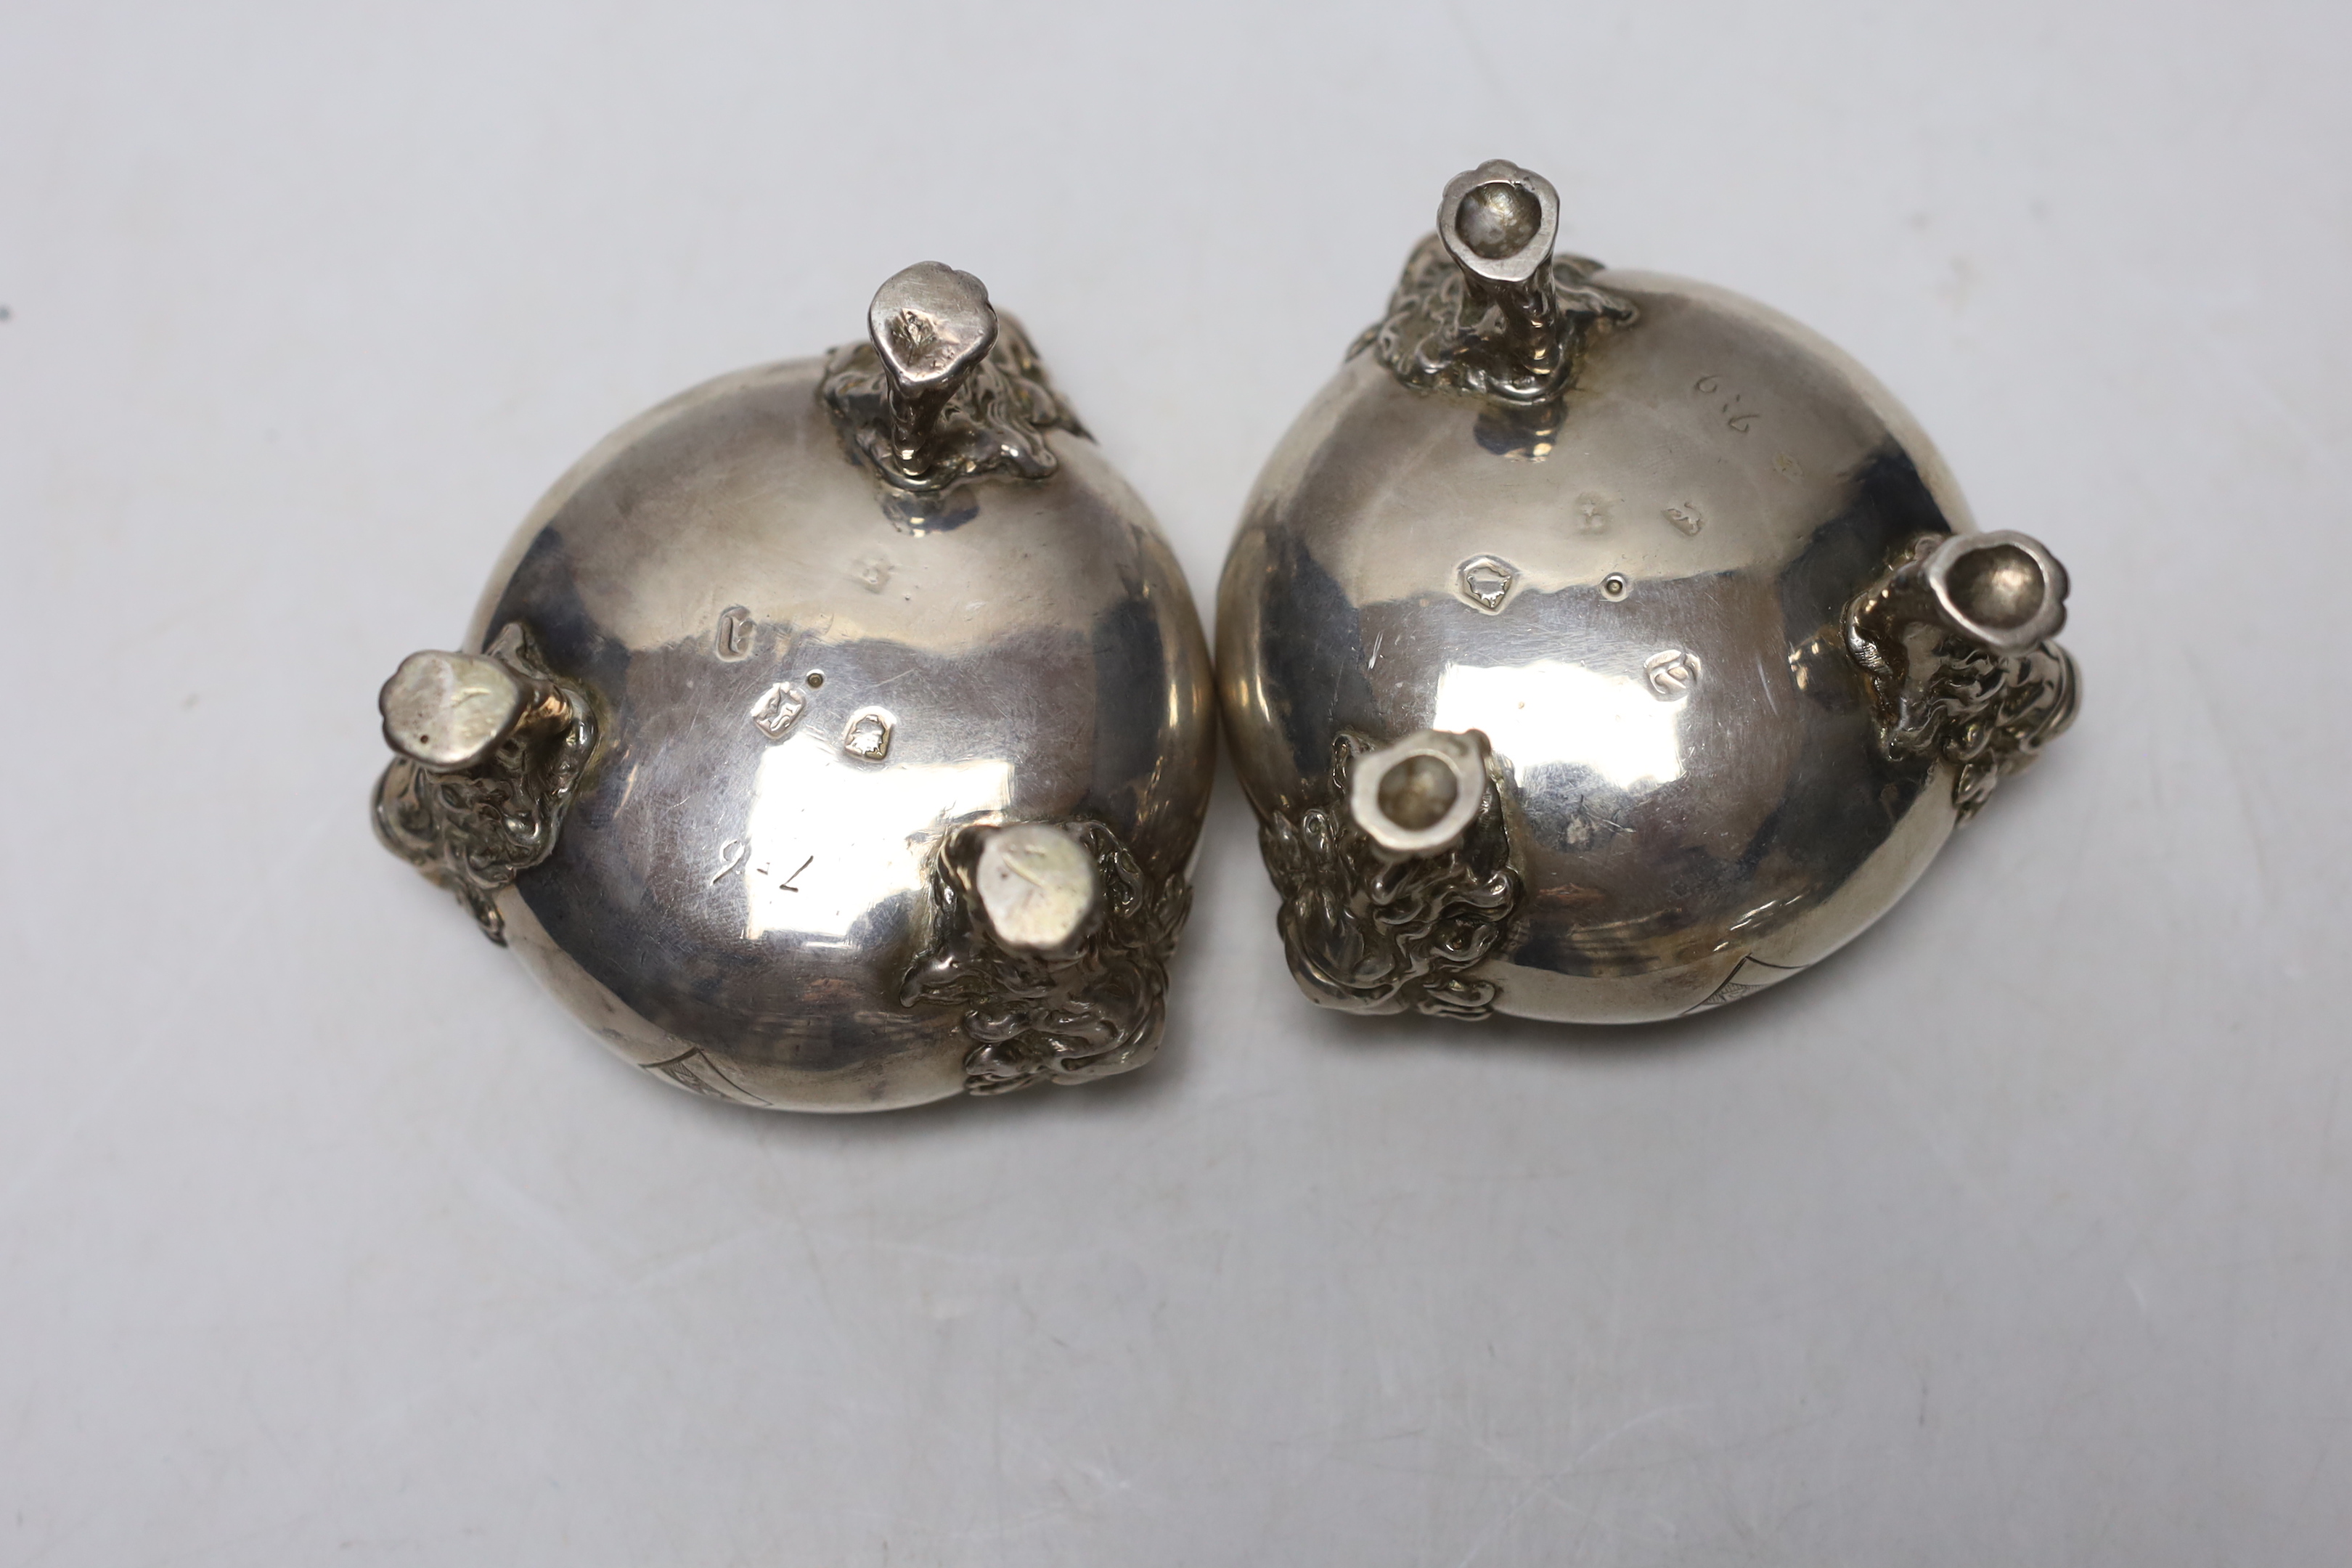 A pair of George II silver bun salts, with lion mask knees, on paw feet, maker's mark rubbed, London, 1736, diameter 70mm, 11.9oz.